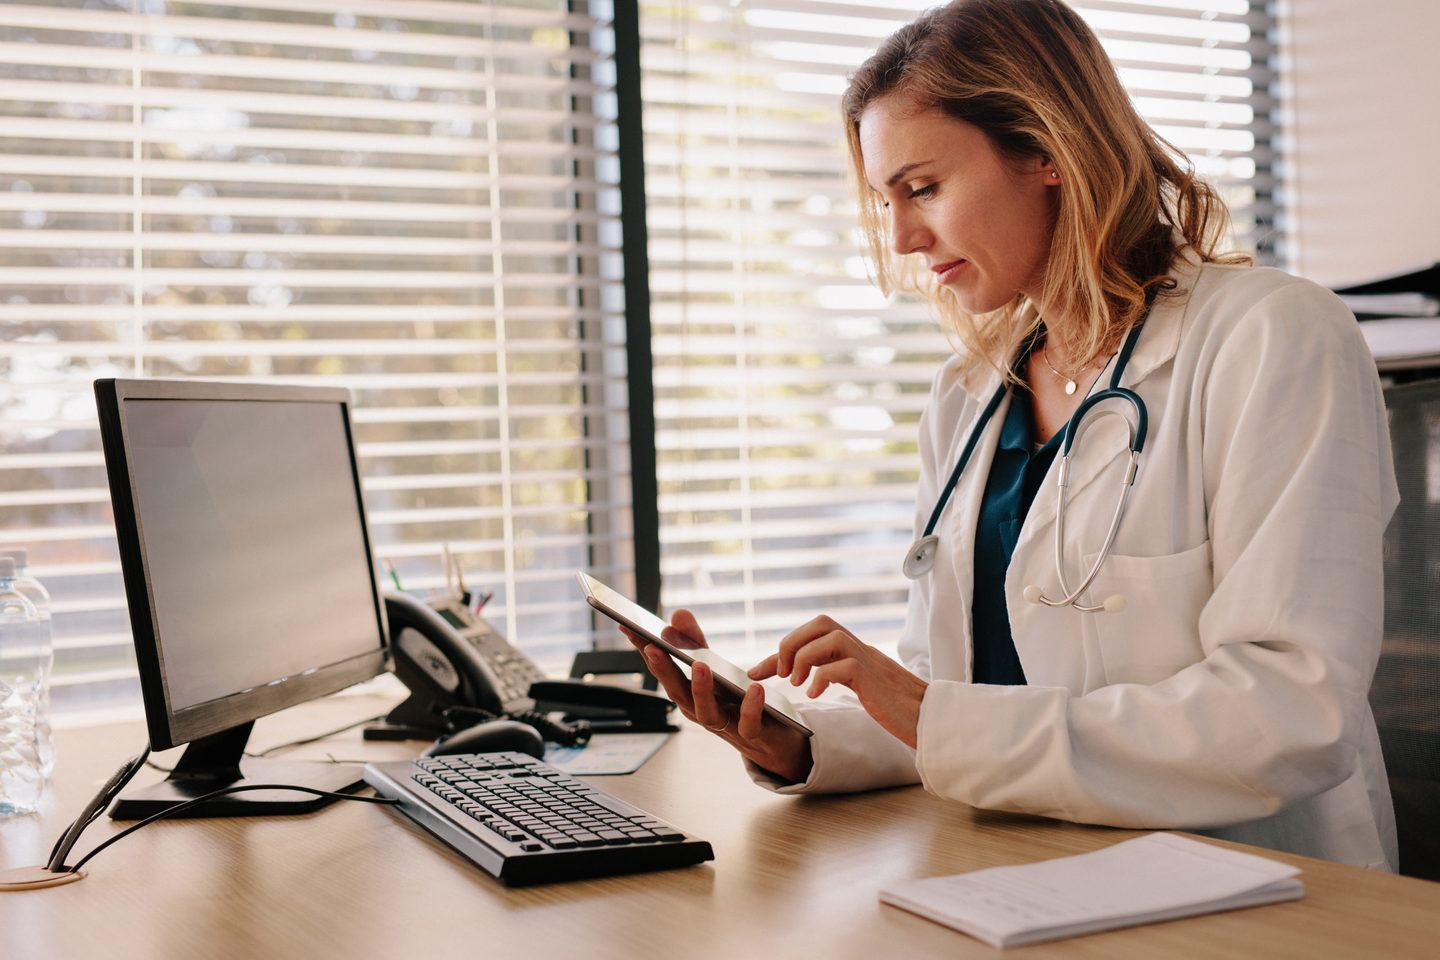 Do You Have the Right Tools and Support for Telemedicine?